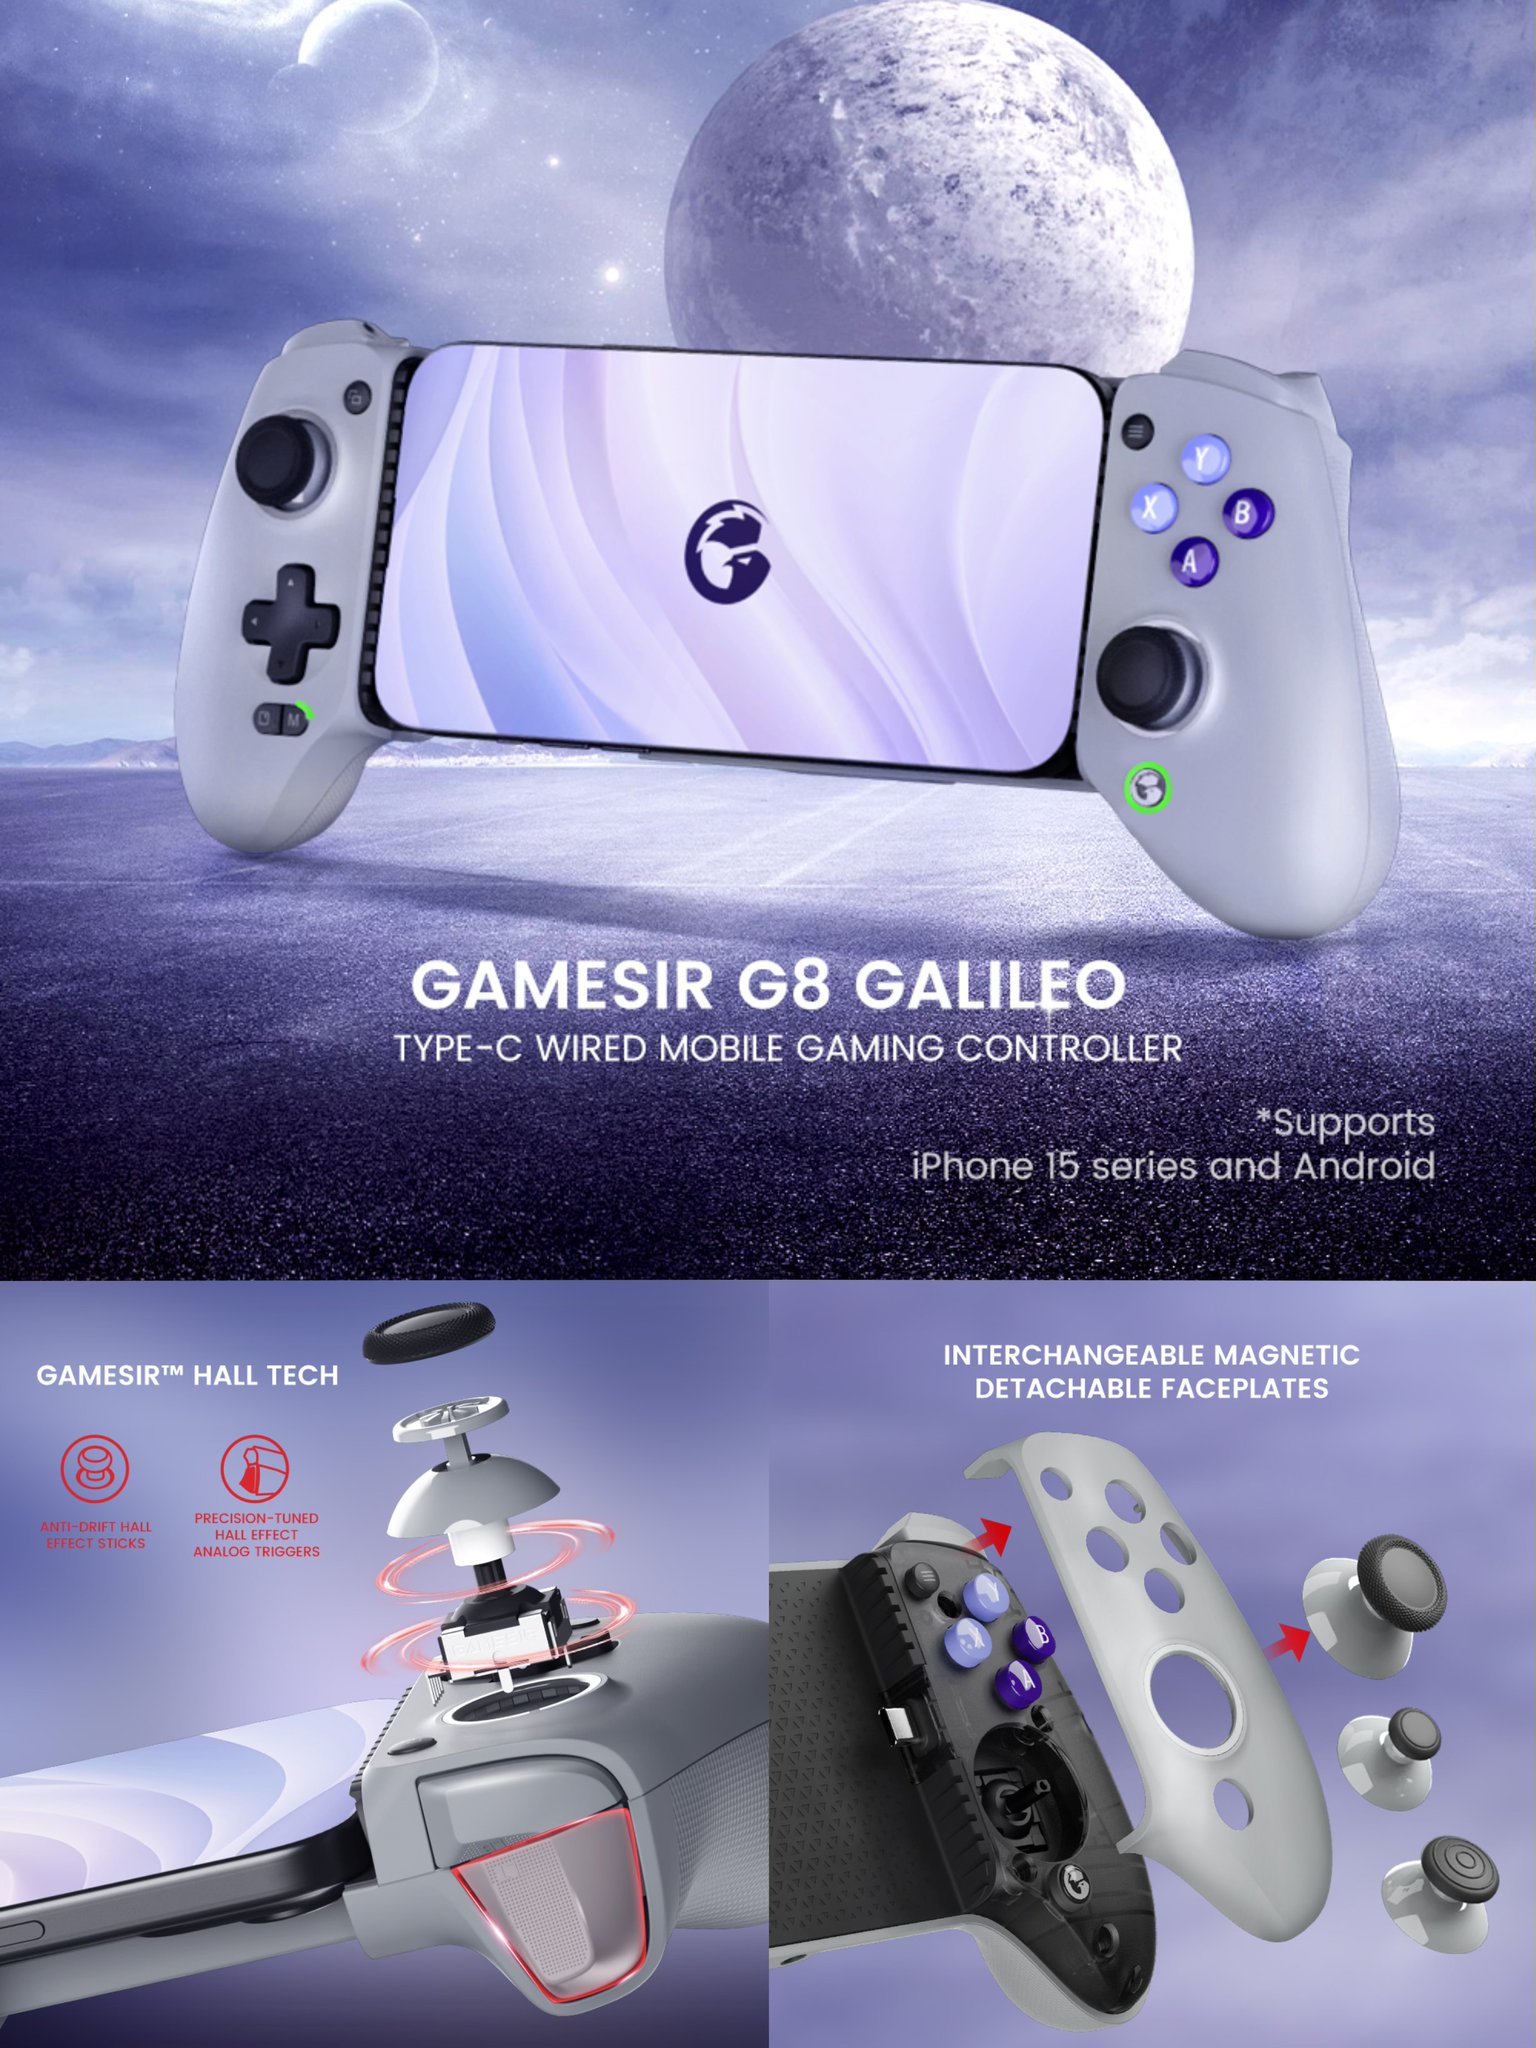 GameSir on X: GameSir G8 Galileo is here with a bang! Check out these  stunning visuals showcasing the 8 key highlights of our latest product.  Share your thoughts and let us know